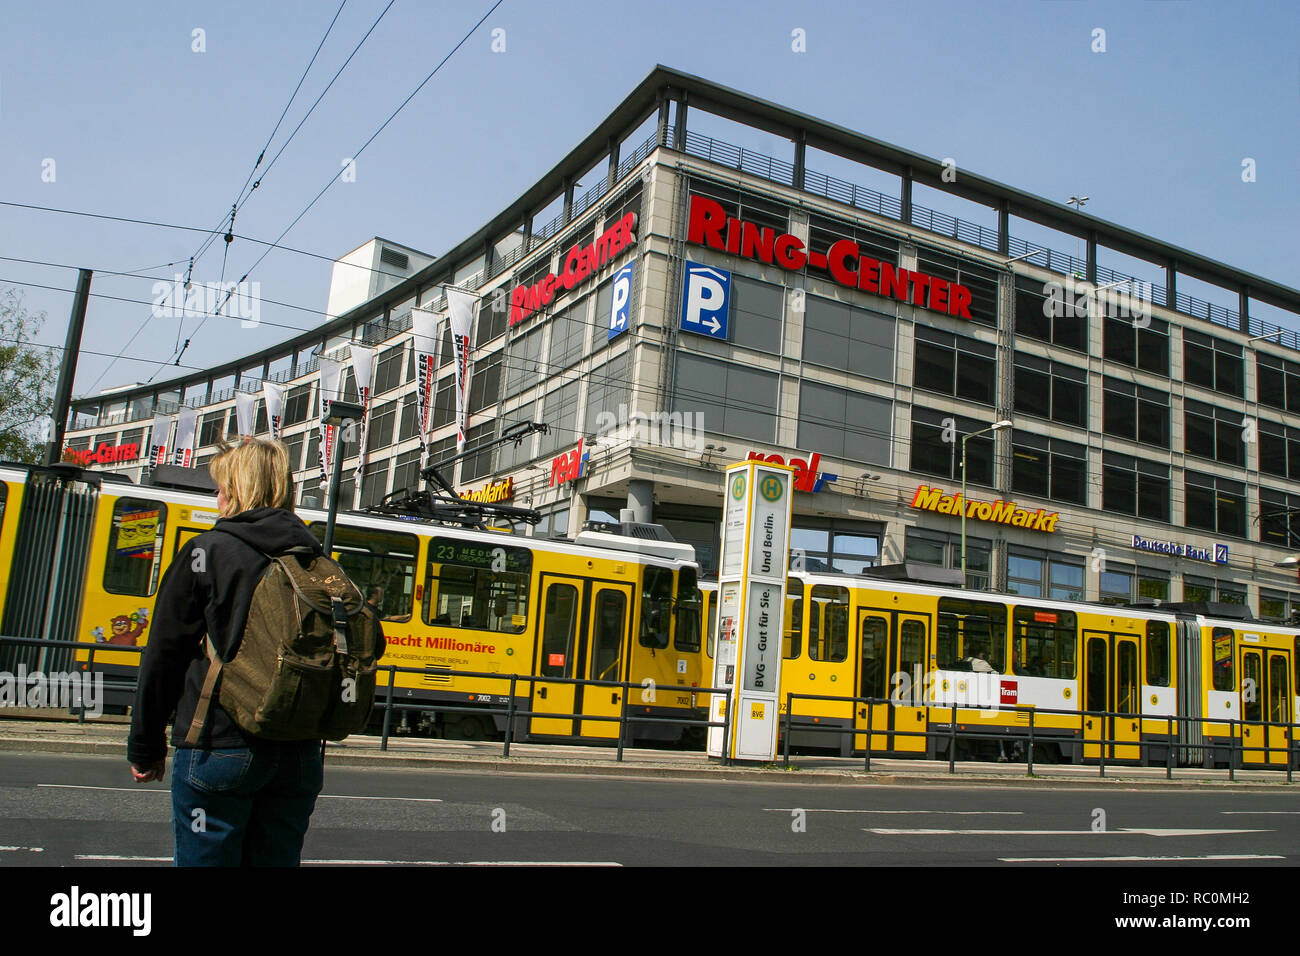 Ring Center, shopping center in Lichtenberg district, Berlin, Germany Stock  Photo - Alamy